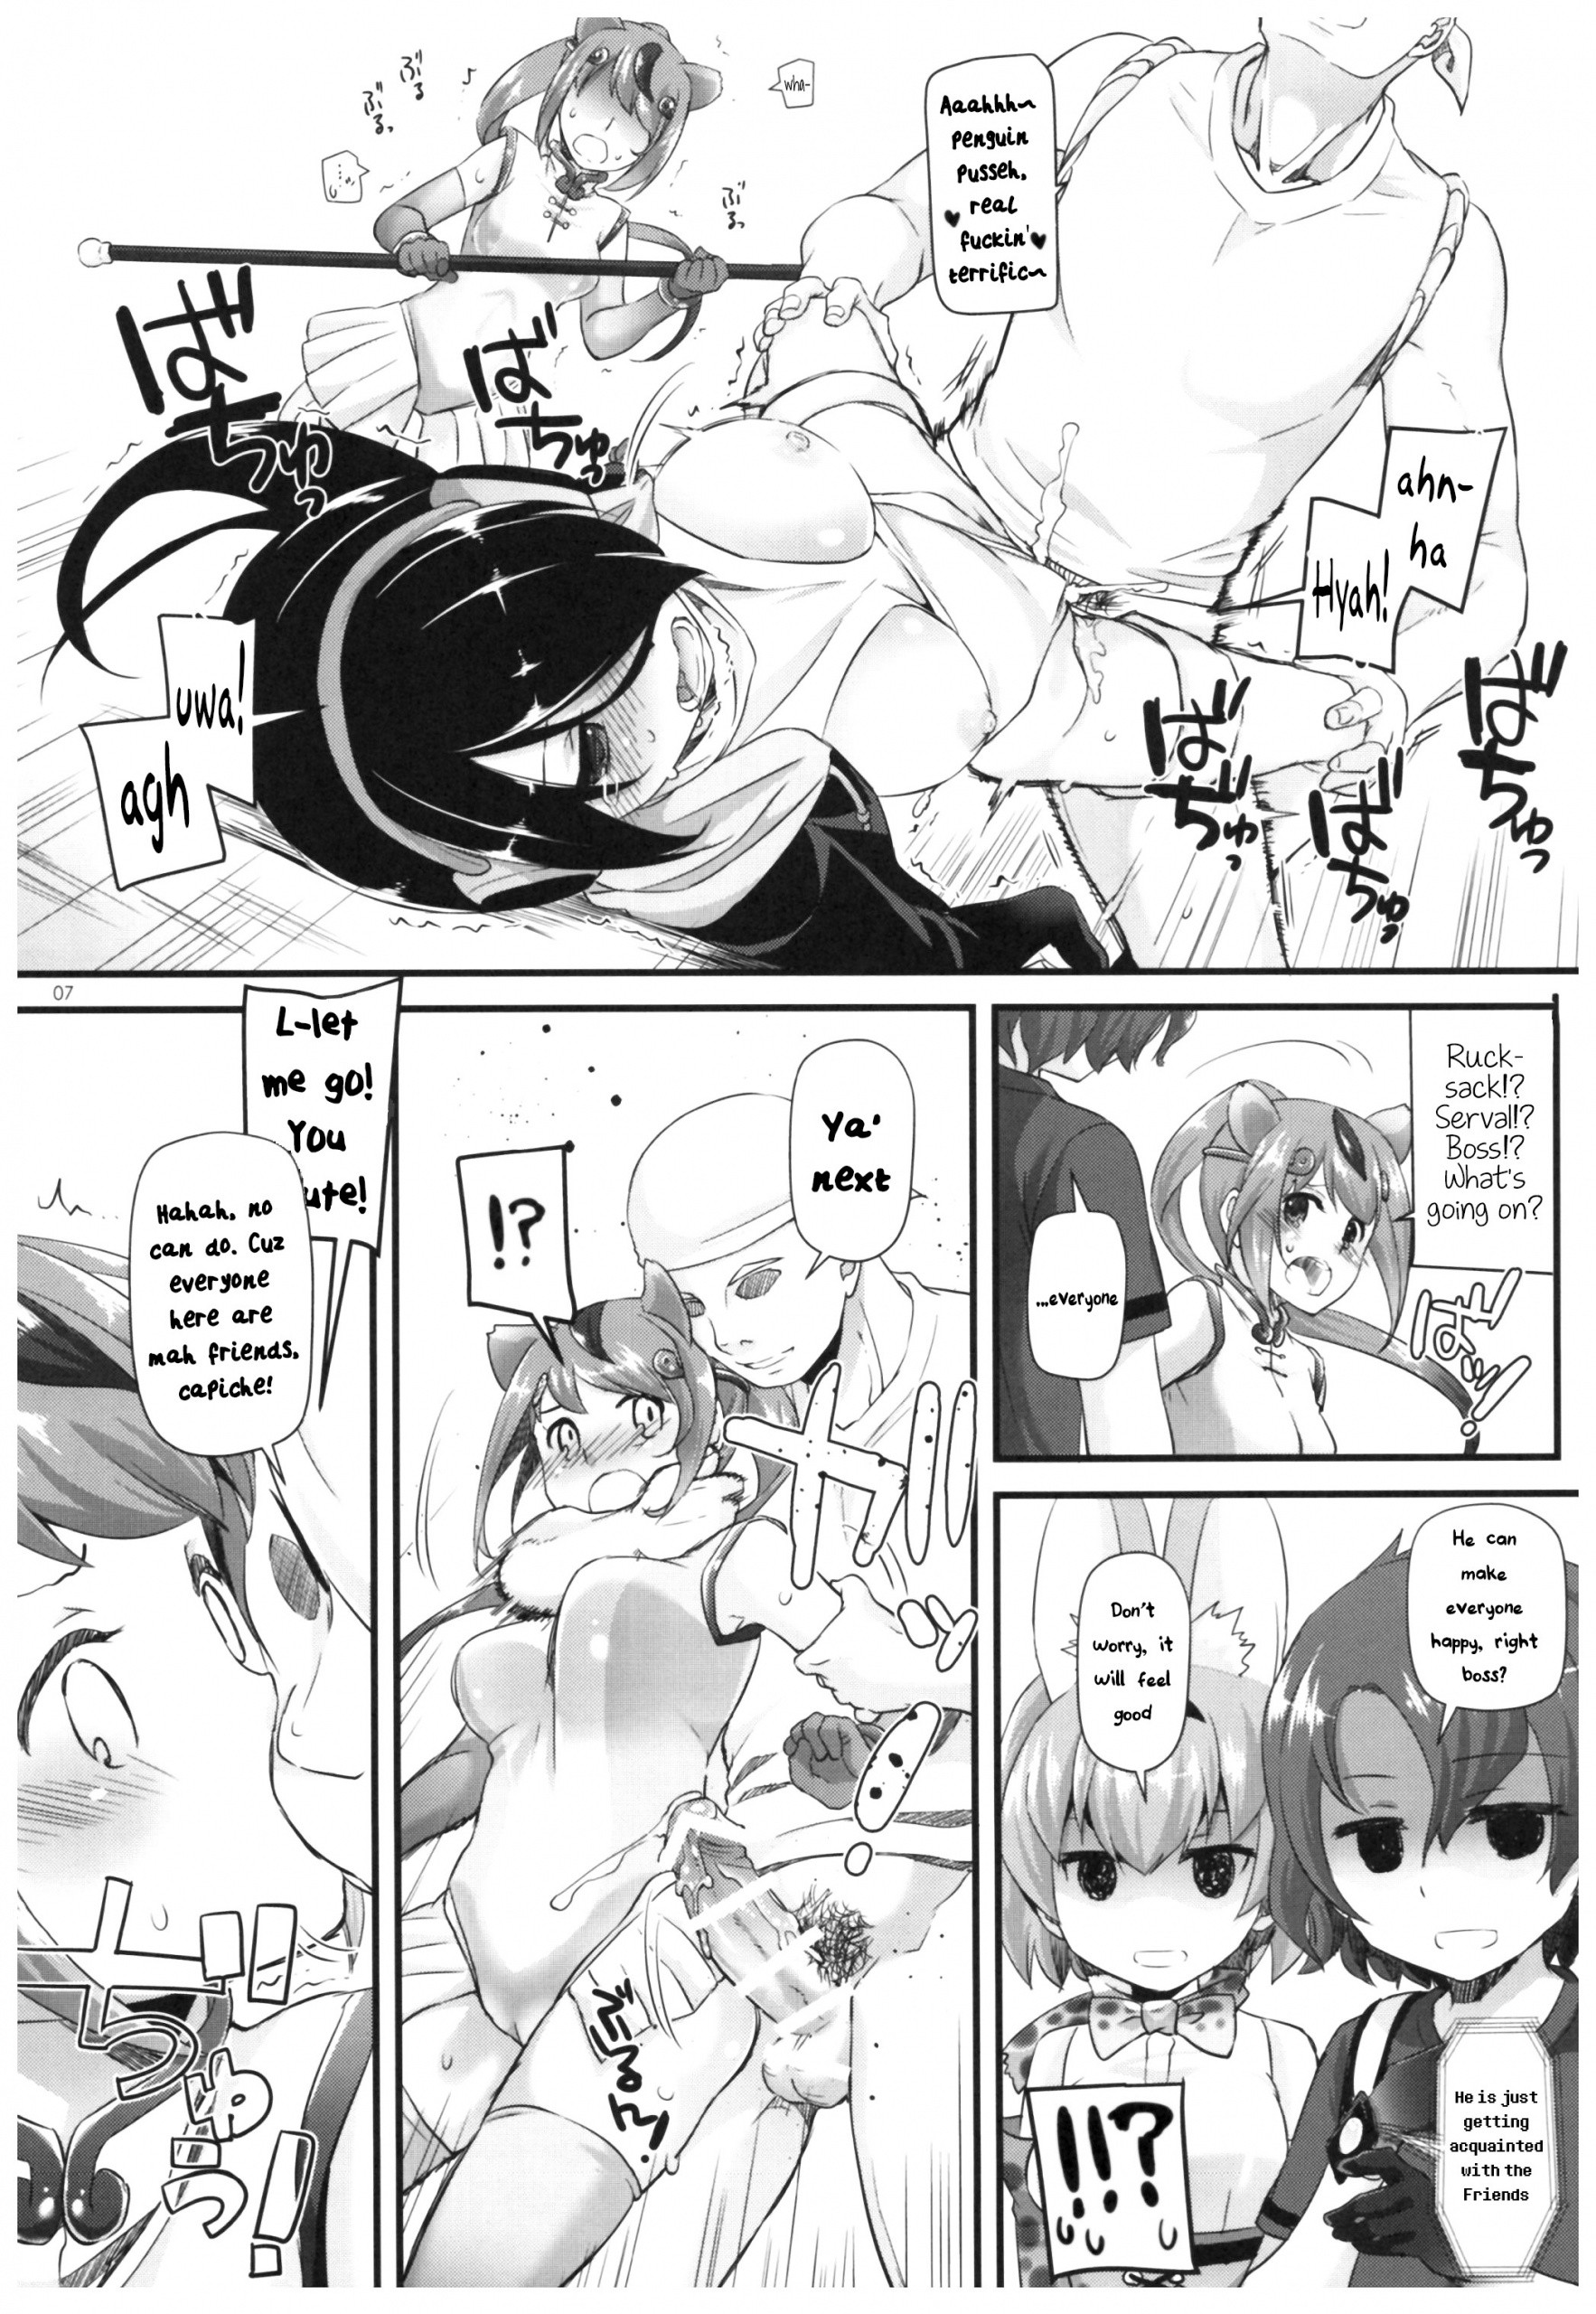 D.L. action 115 hentai manga picture 6